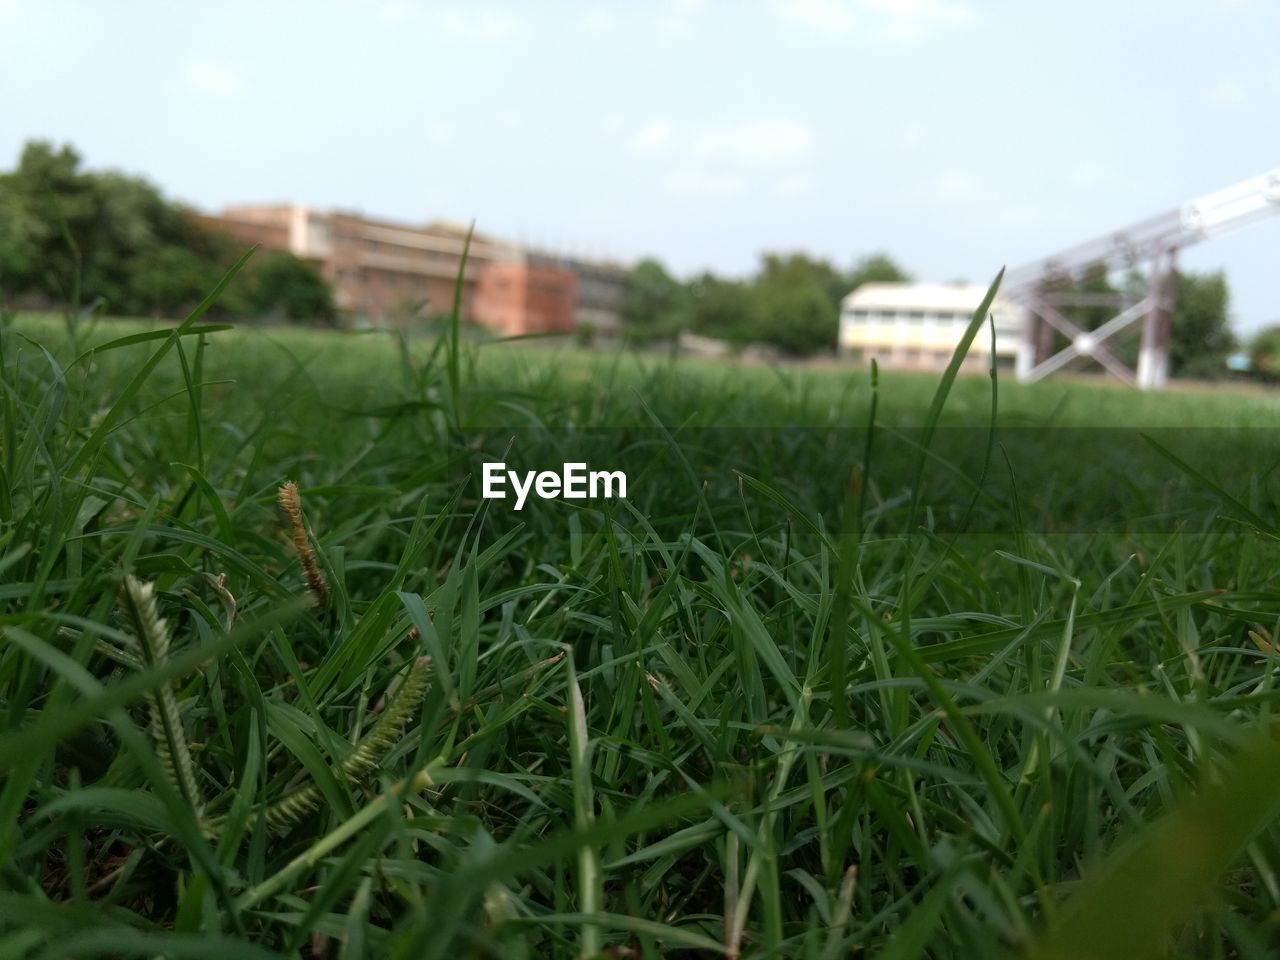 CLOSE-UP OF GRASS ON GRASSY FIELD